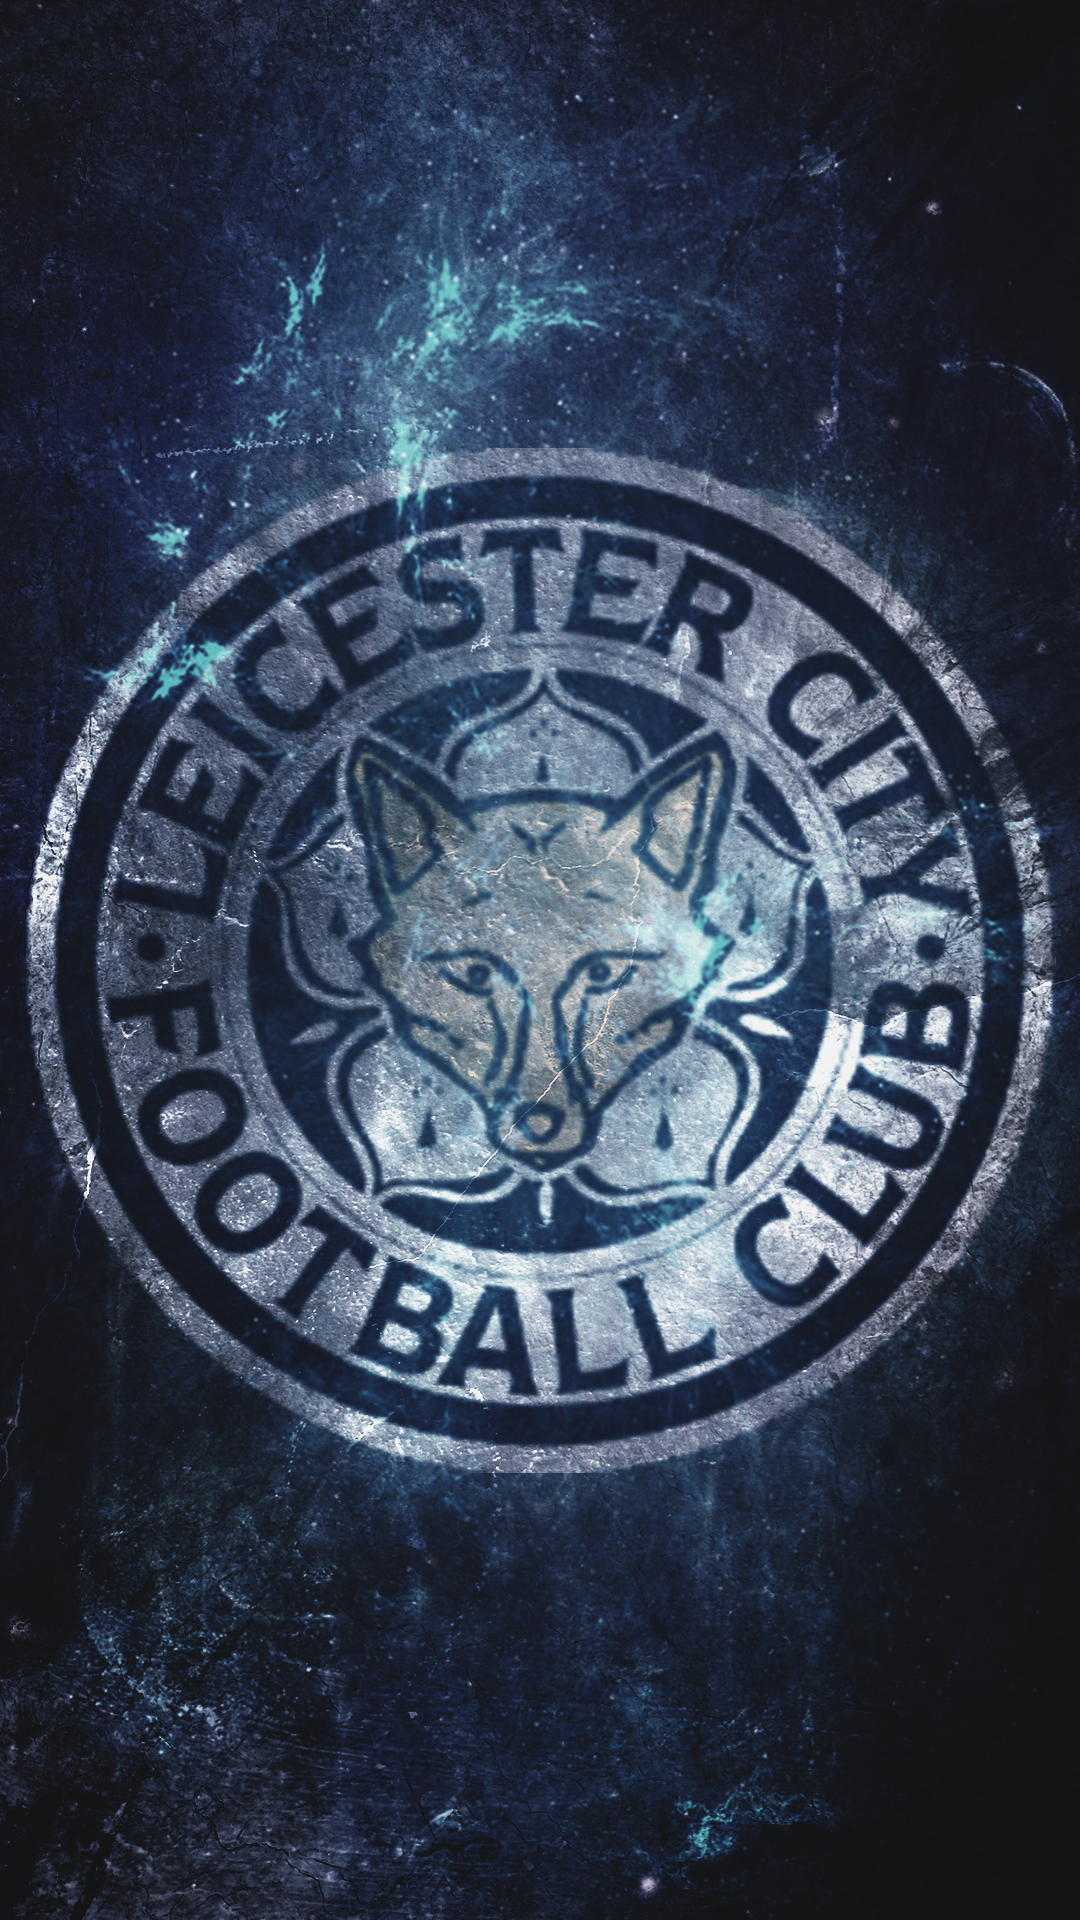 Leicester City Wallpaper For Smartphone By Tsgraphic On Deviantart